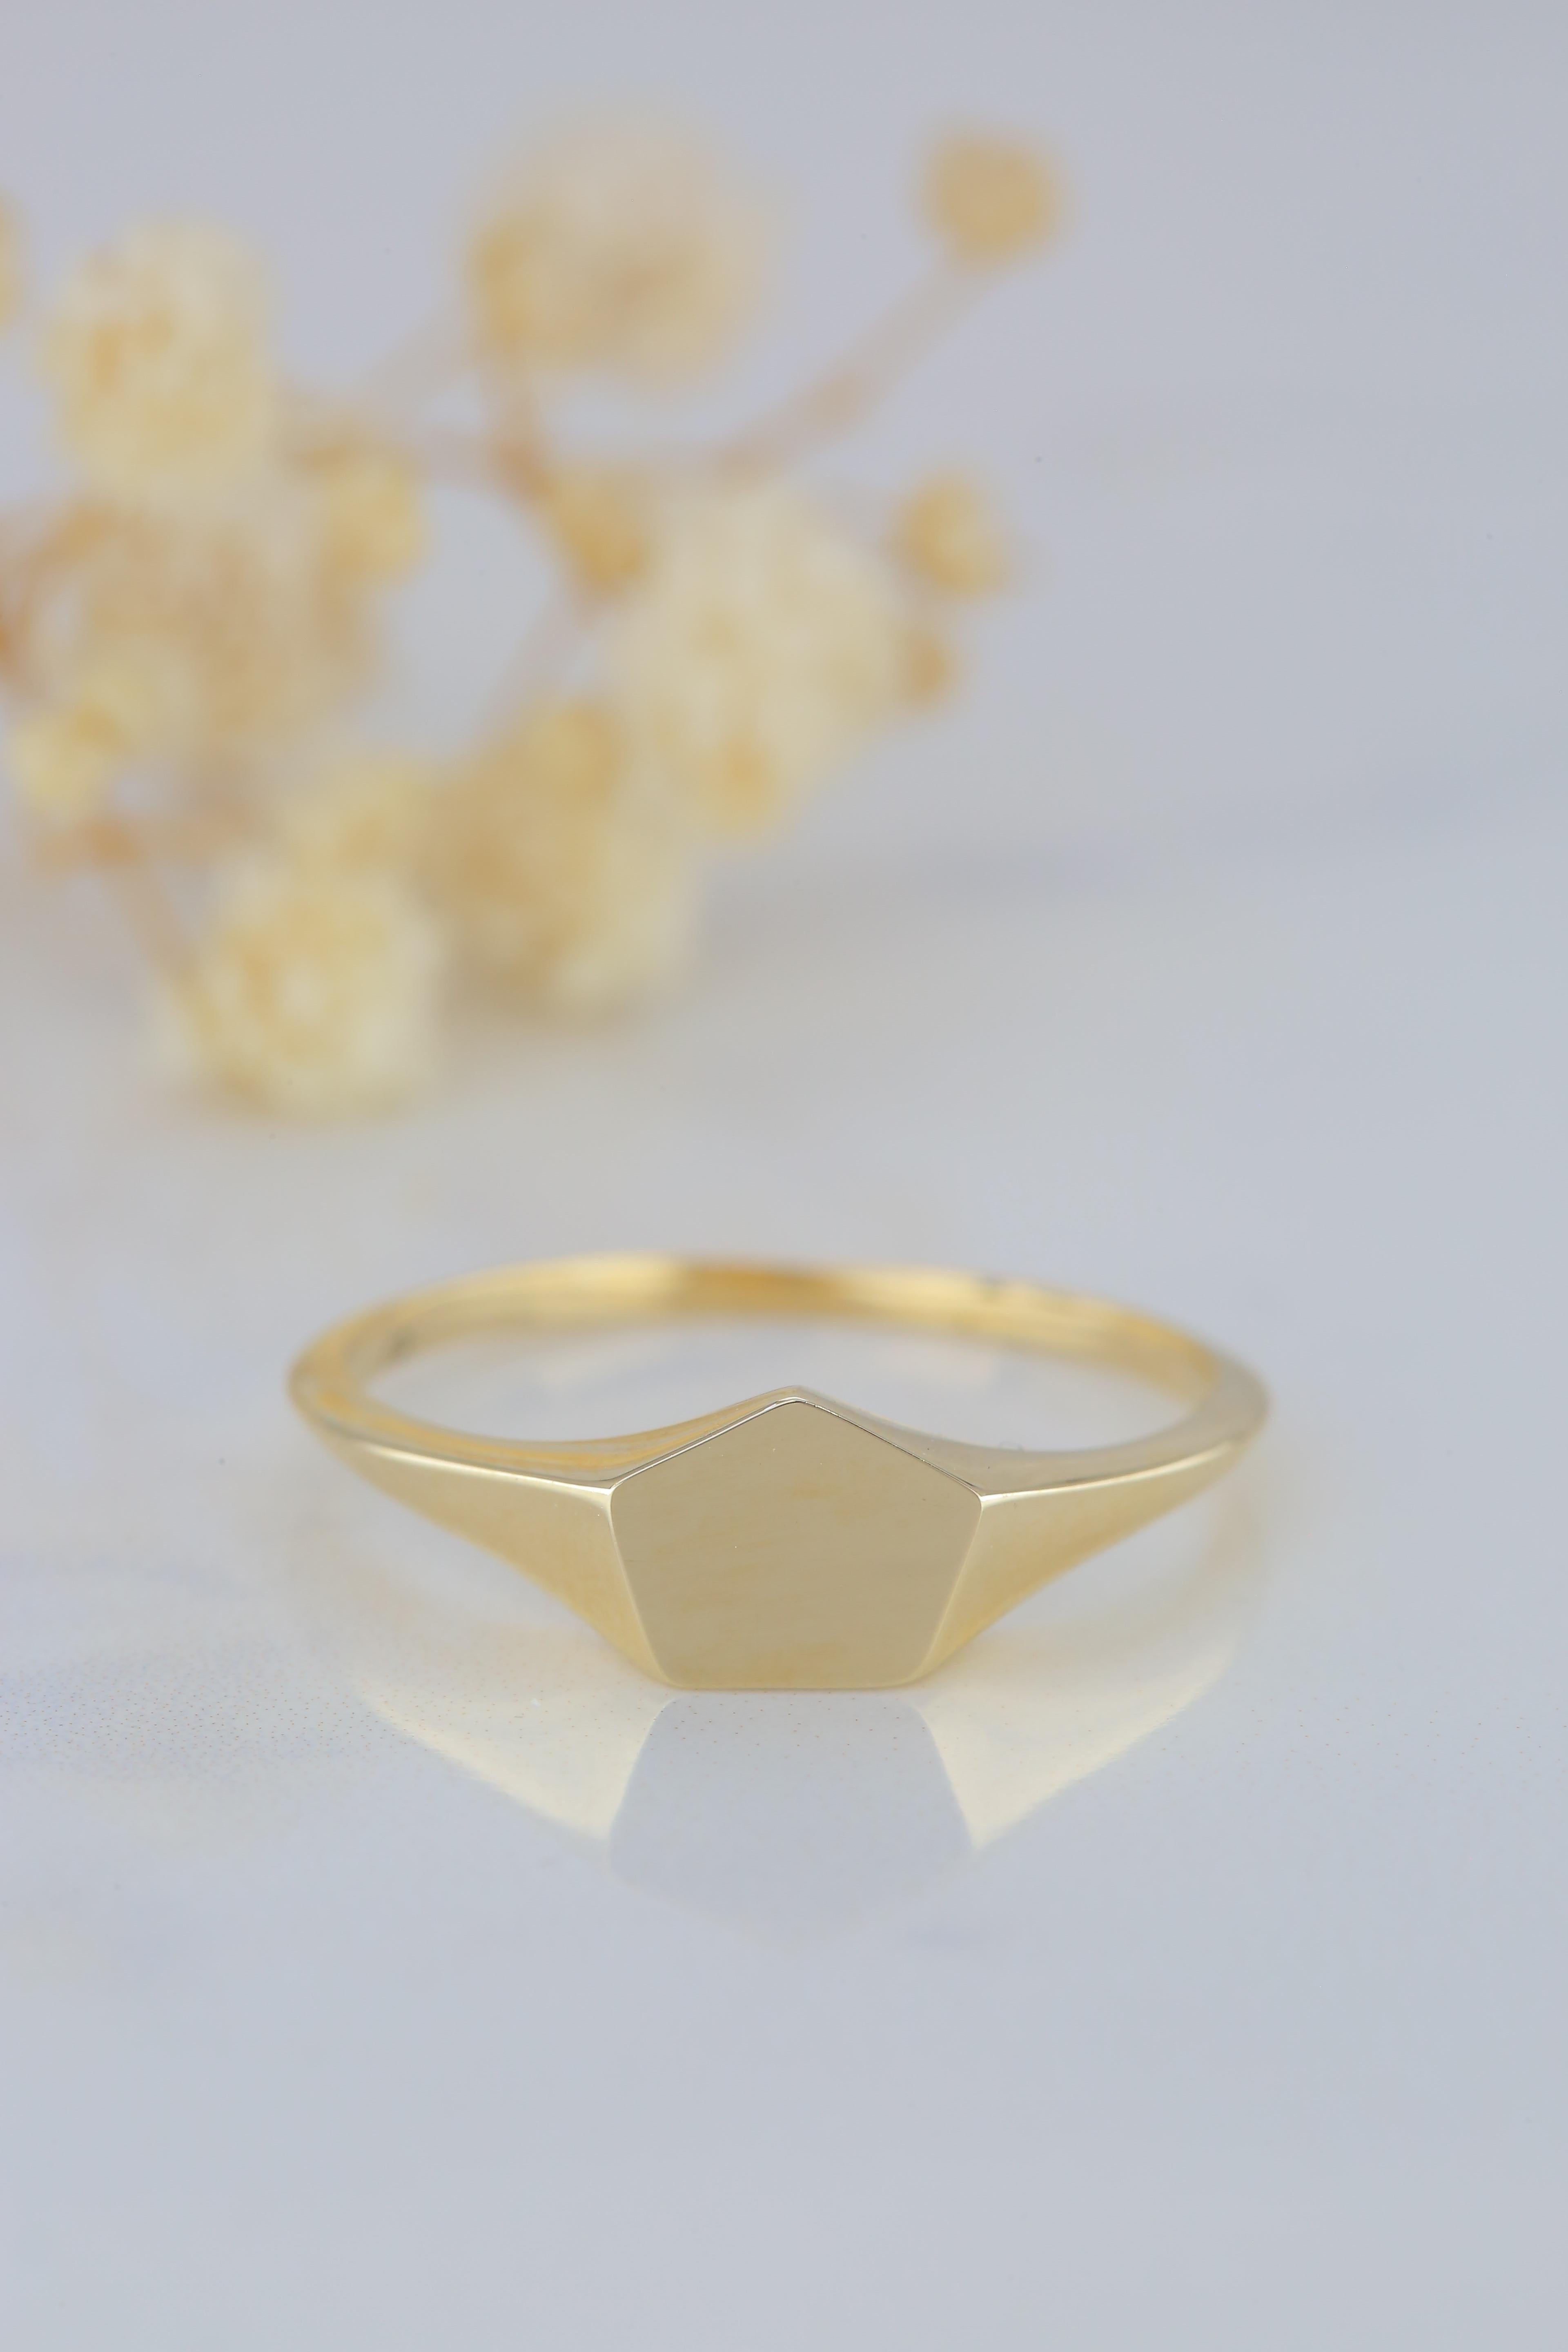 For Sale:  Pinky Signet Ring, 14K Gold Pinky Pentagon Signet Ring, Small Pentagonal Ring 5